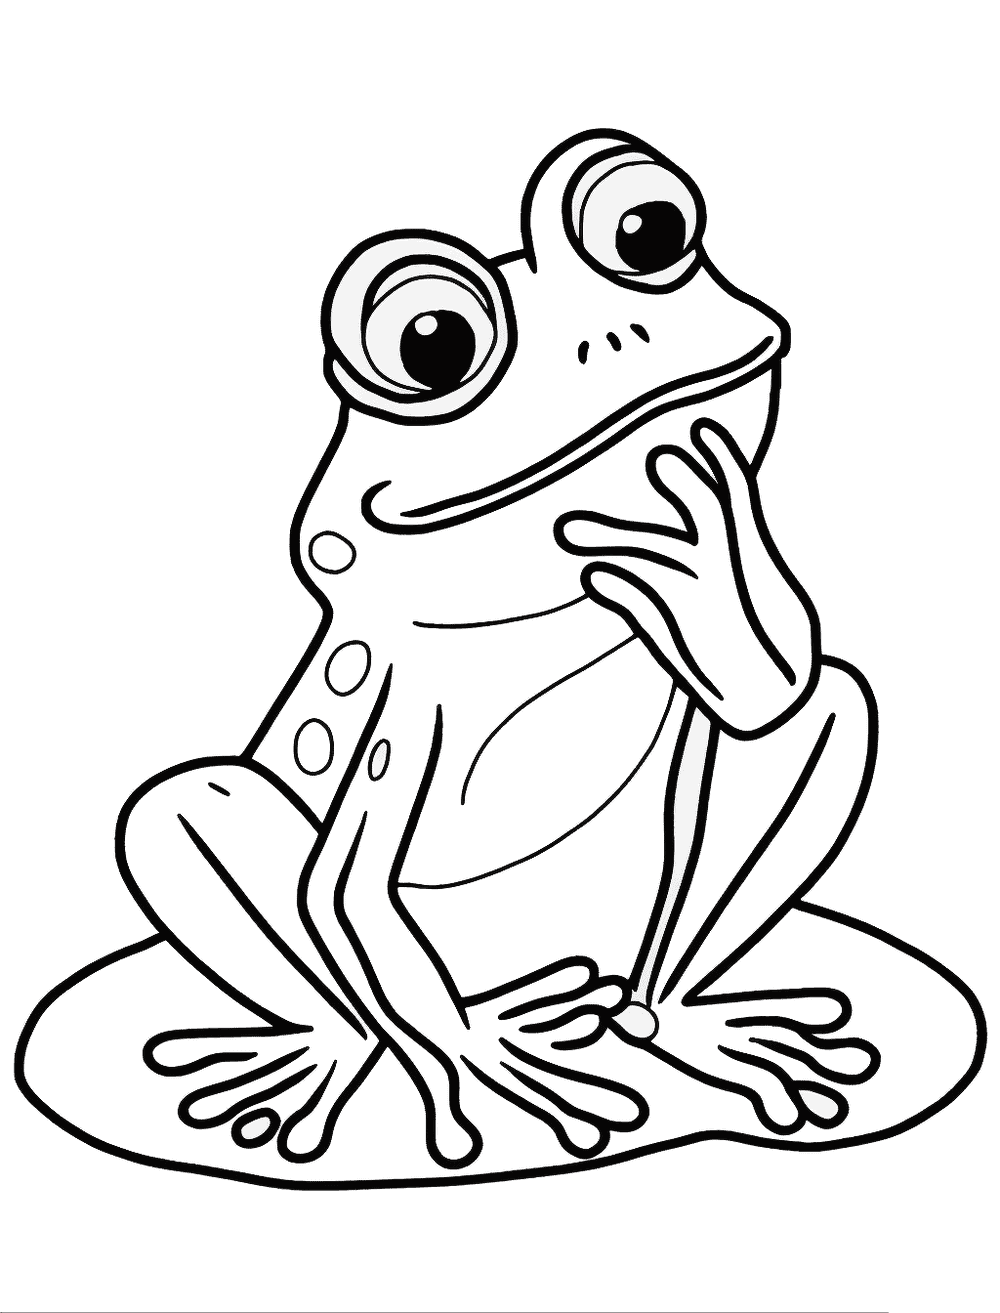 Pepe Frog Coloring Page - A frog in the style of Pepe with his finger to his chin thinking